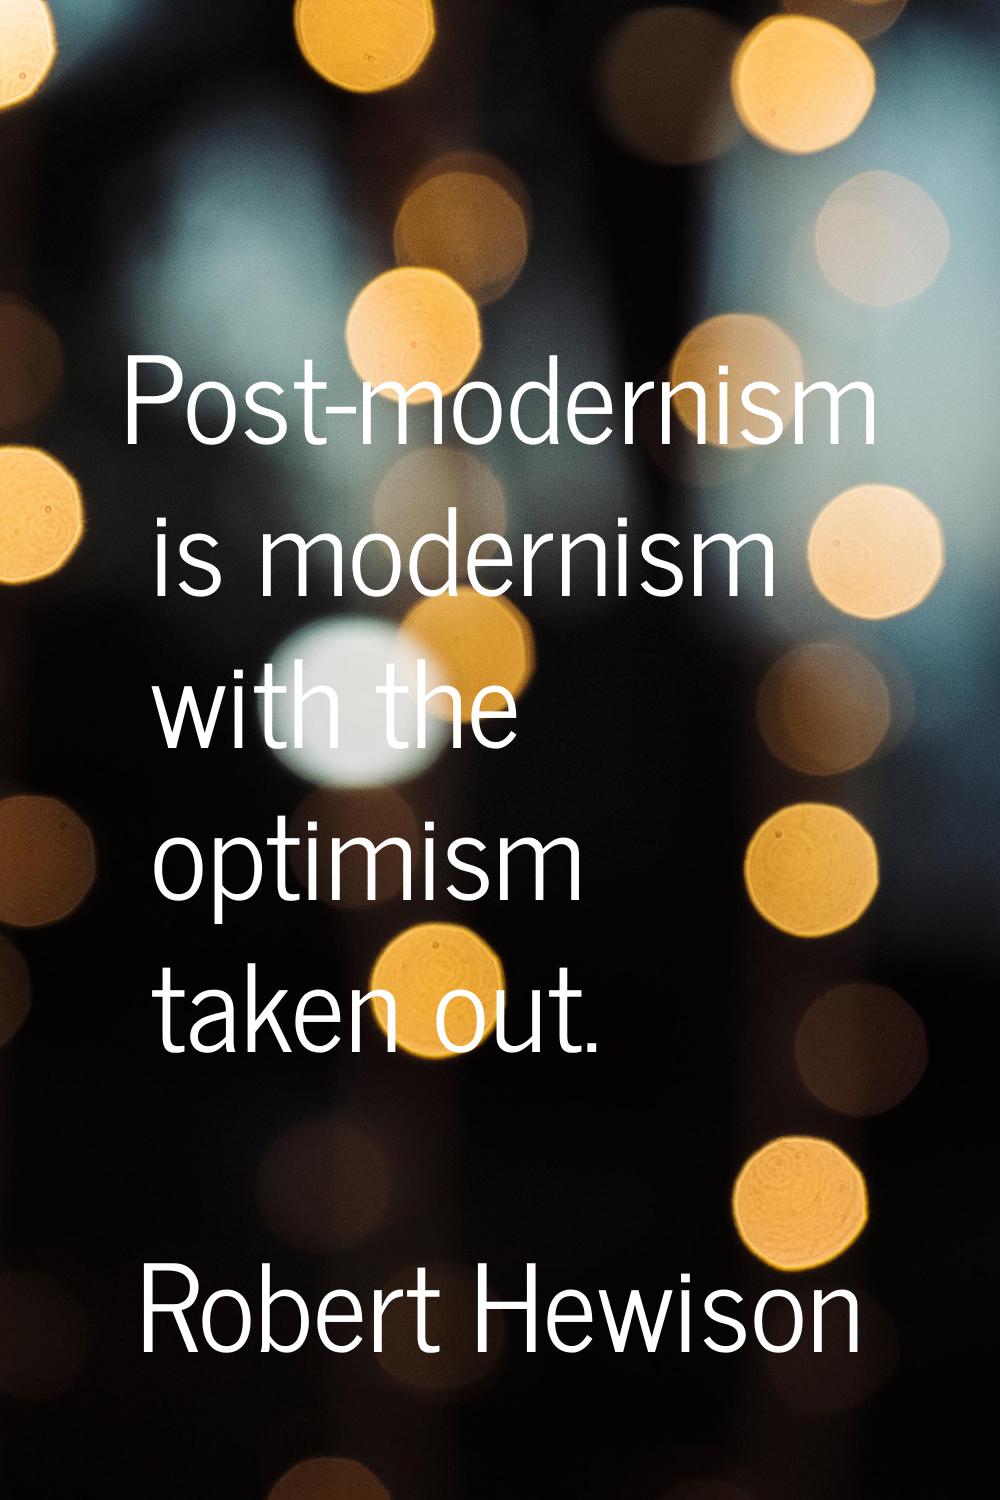 Post-modernism is modernism with the optimism taken out.